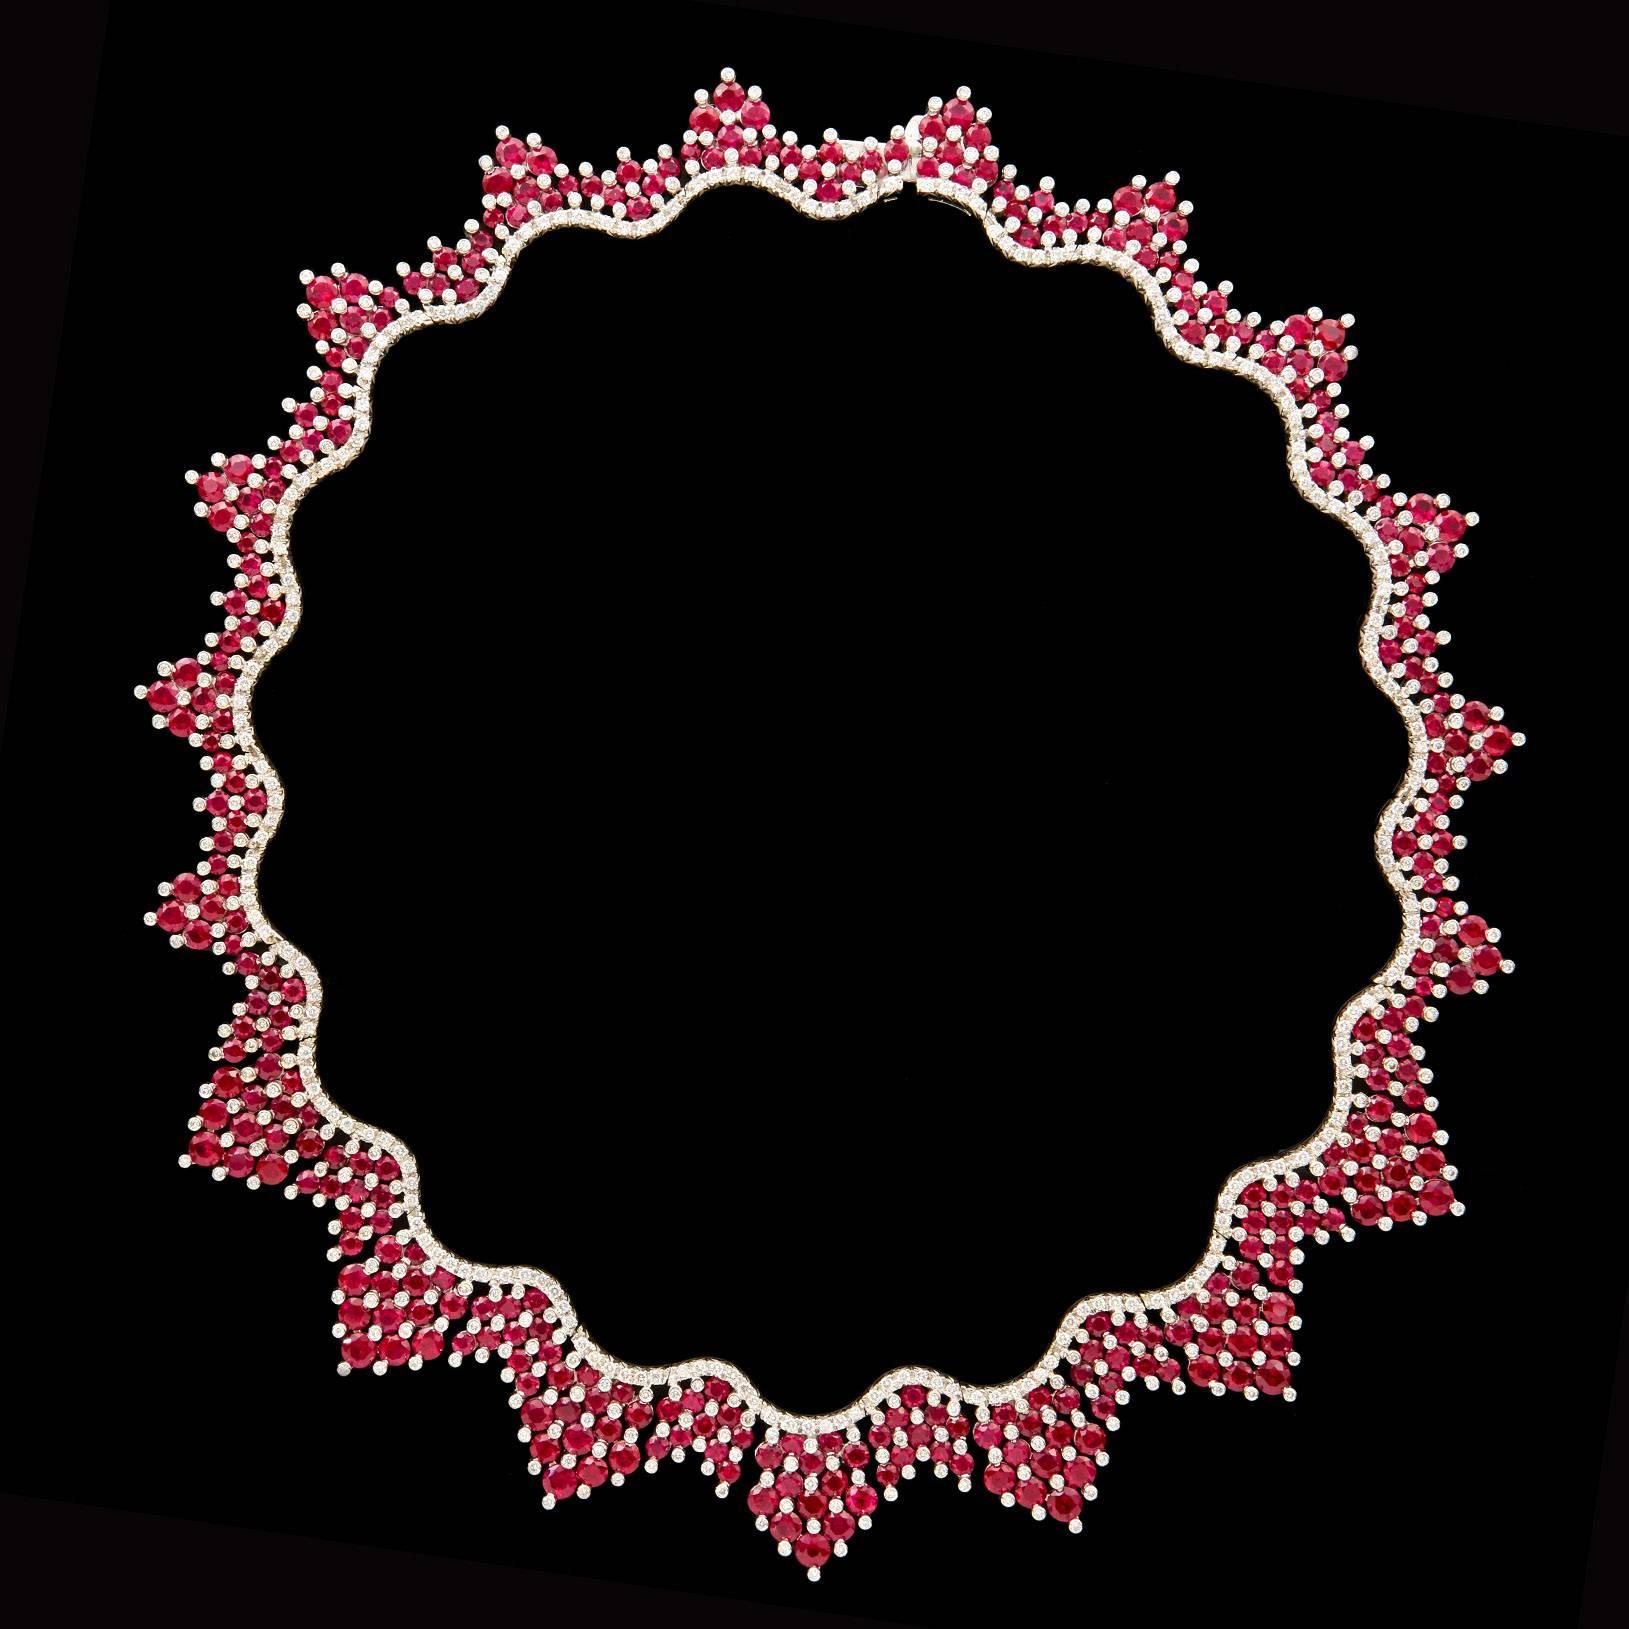 This Fabulous Favero Collar Necklace features 41.21 carats of Round Brilliant Cut Rubies accented with 5.60 carats of Round Brilliant Cut Diamonds set in 18Kt White Gold. Length is 16 inches and weighs 83.7 grams total.  This is a great accent piece!